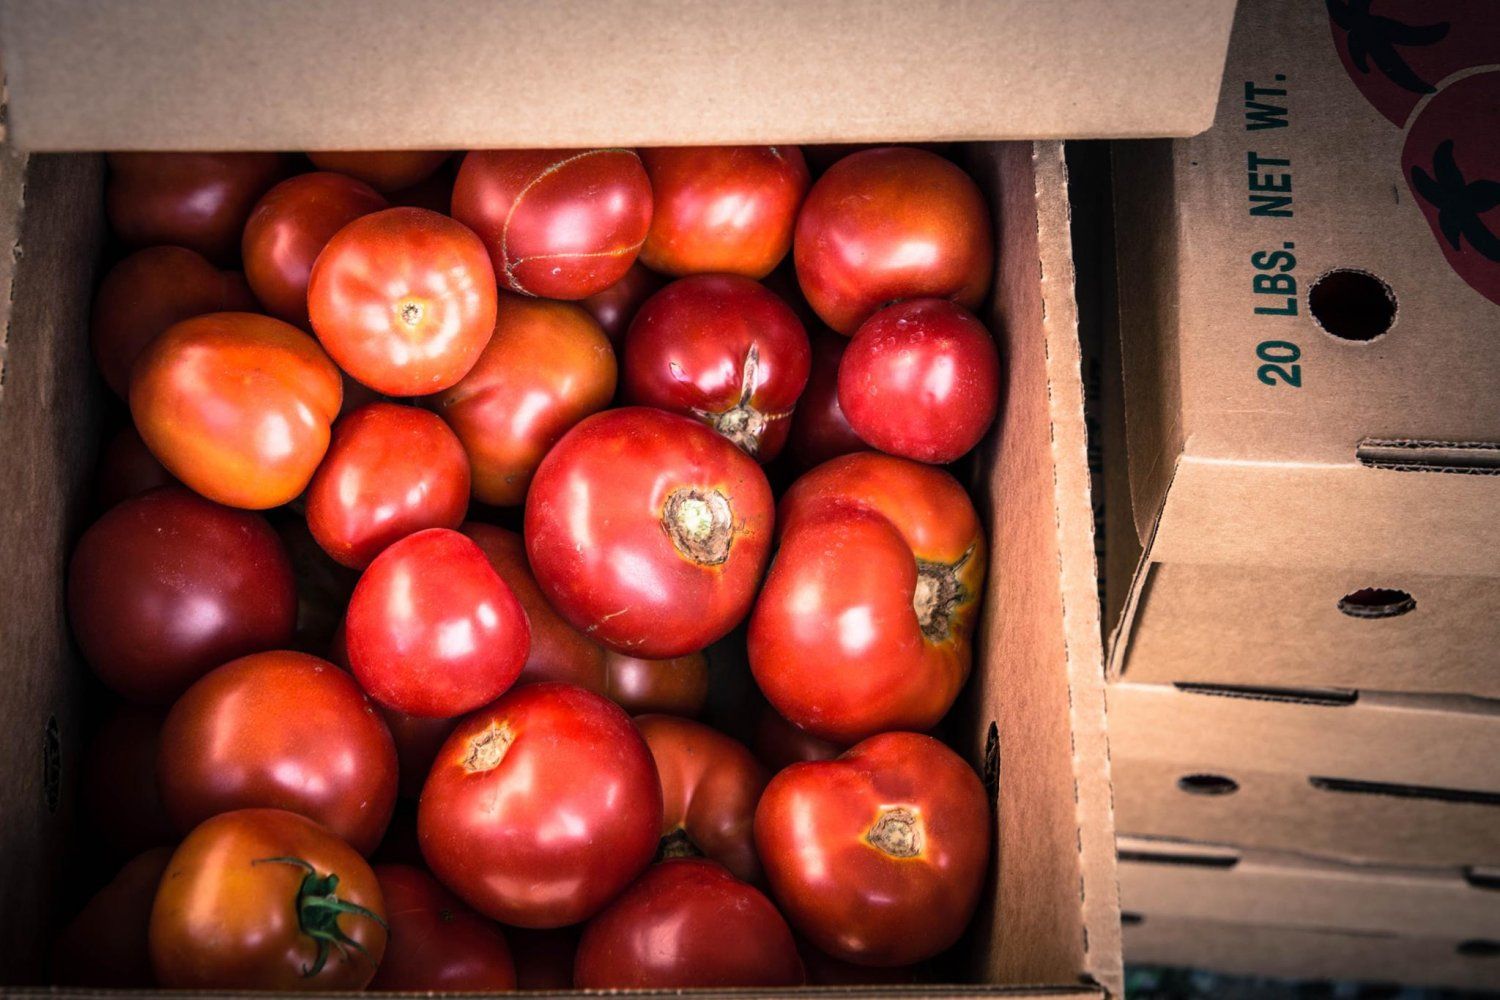 Farm Happenings for Suffield Farm Stand Bulk Tomato Aale, Saturday Aug 21, 2021